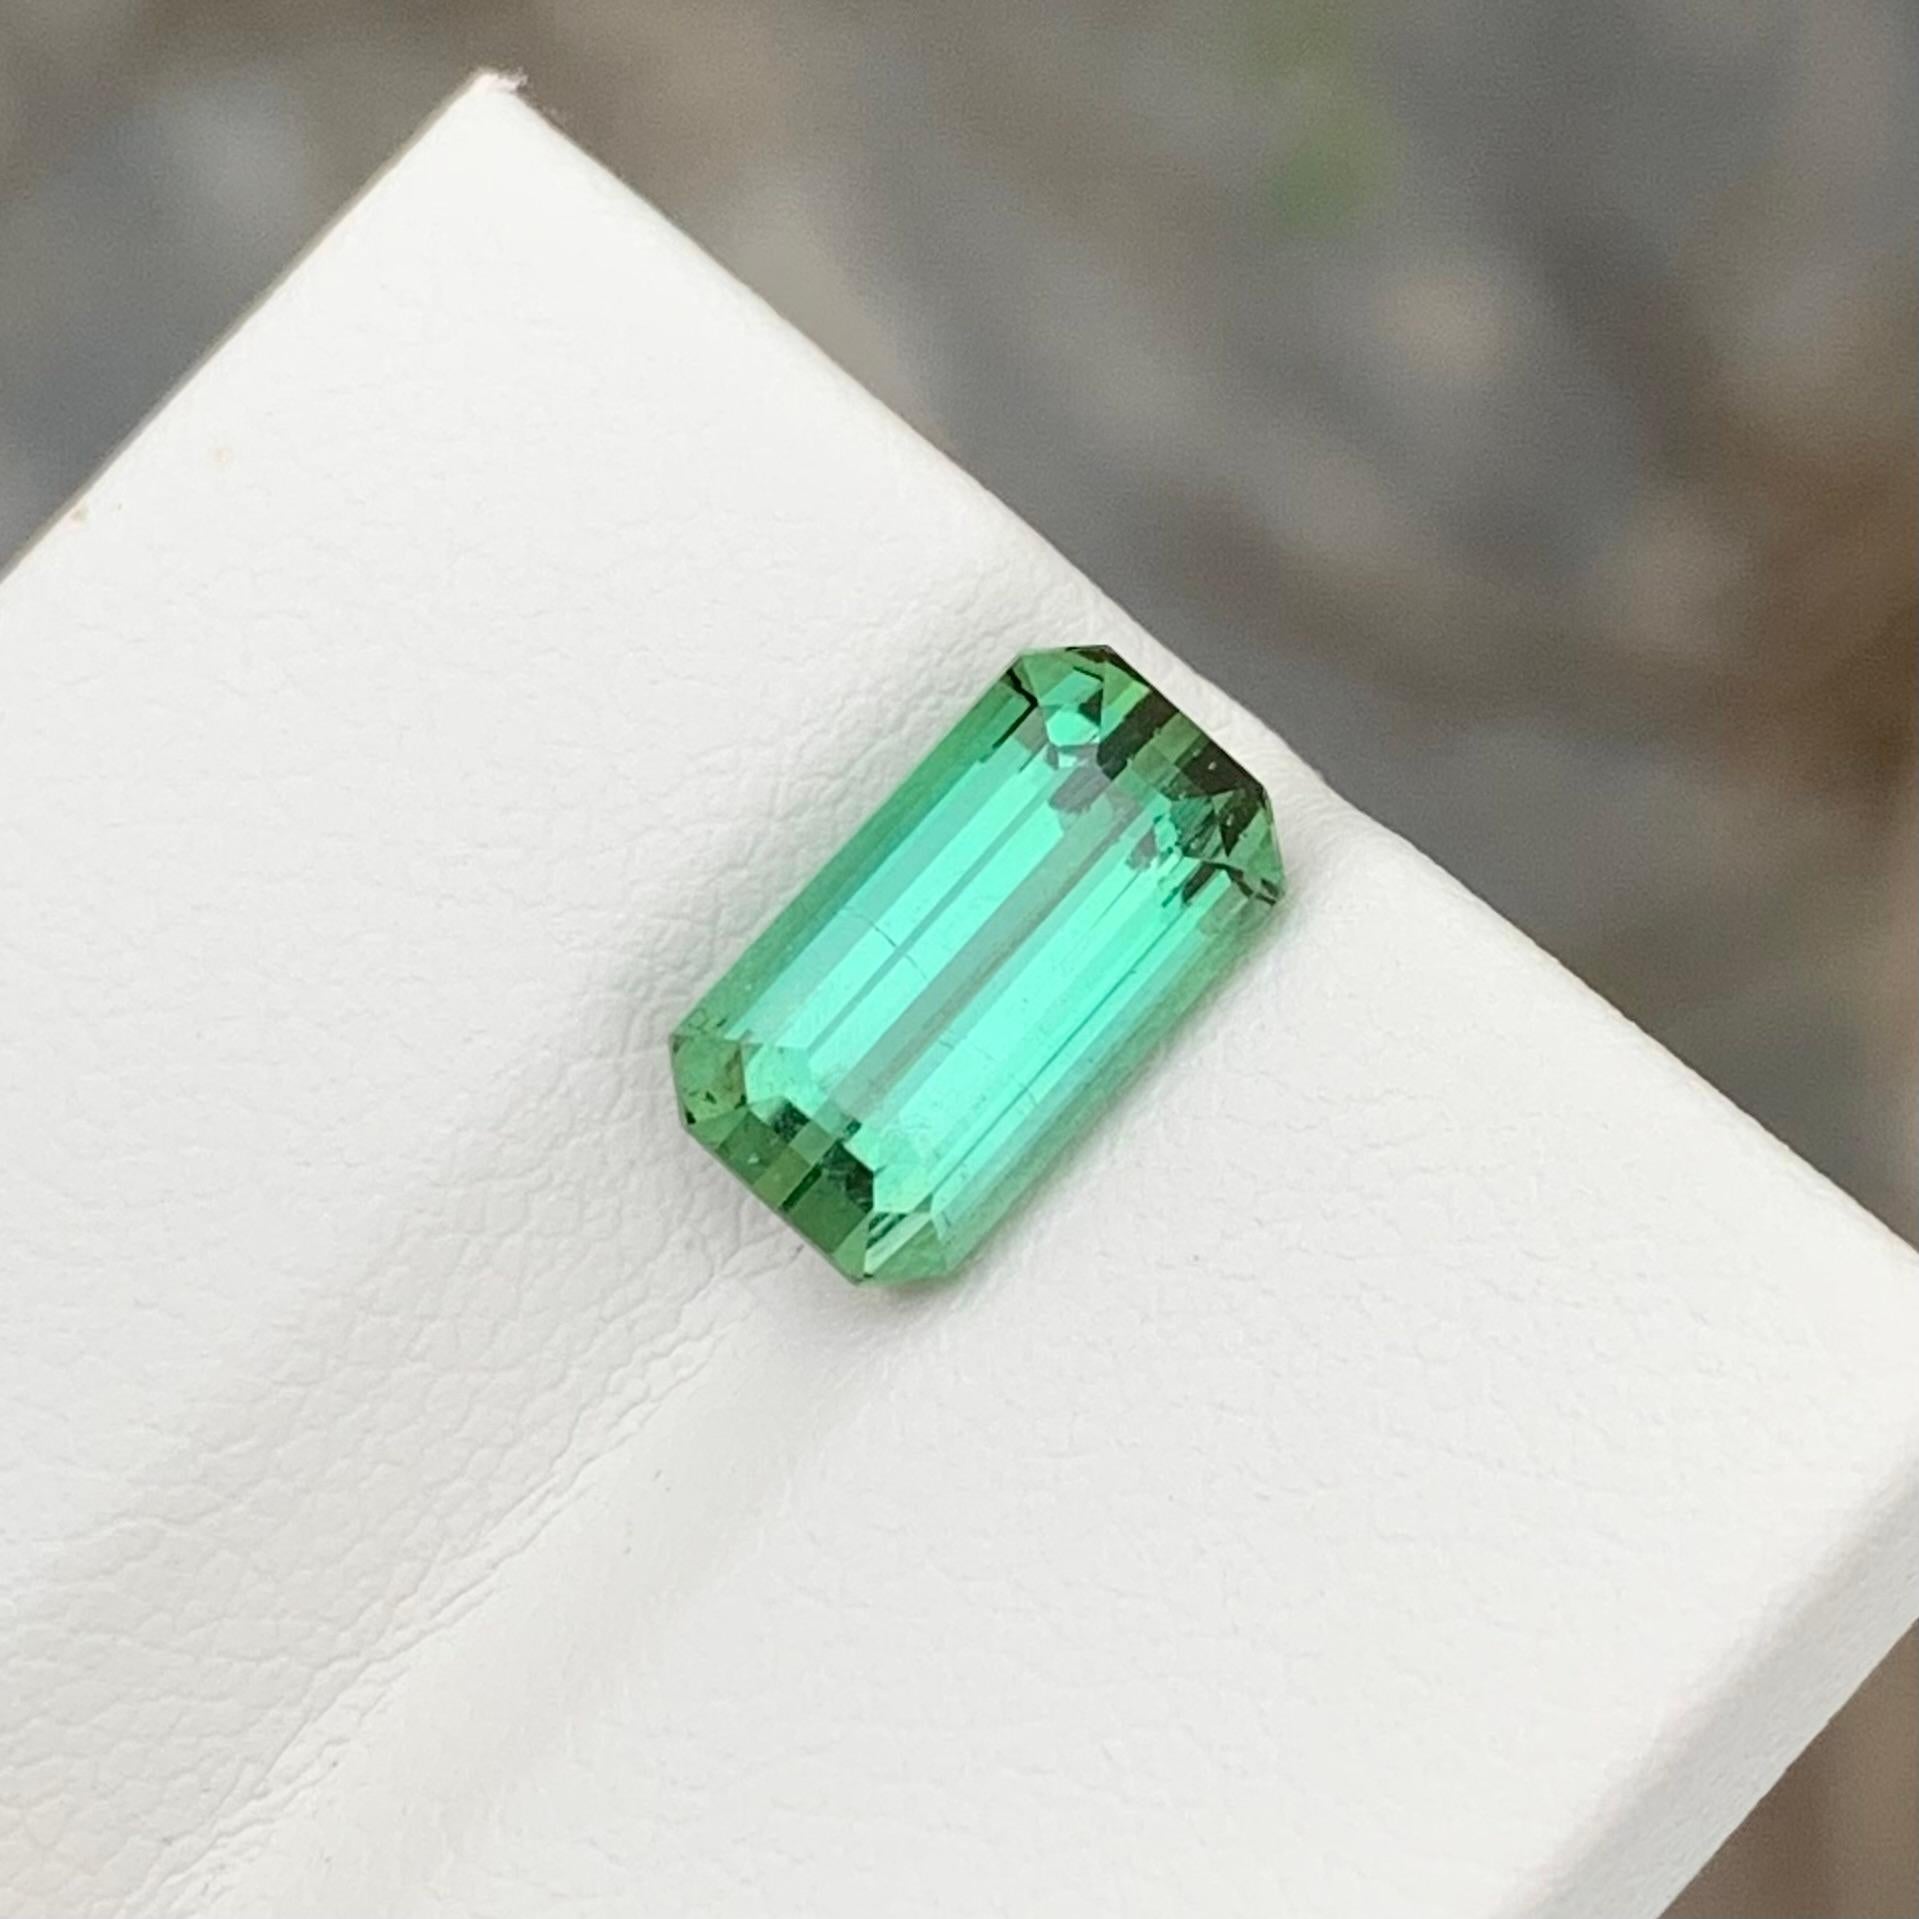 Loose Tourmaline 
Weight: 3.15 Carats 
Dimension: 10.2x5.8x5.8 Mm
Origin: Kunar Afghanistan 
Shape: Emerald 
Color: Mint Green
Treatment: Non
Certificate: On Demand

Mint green tourmaline, with its delicate hue reminiscent of fresh spring foliage,